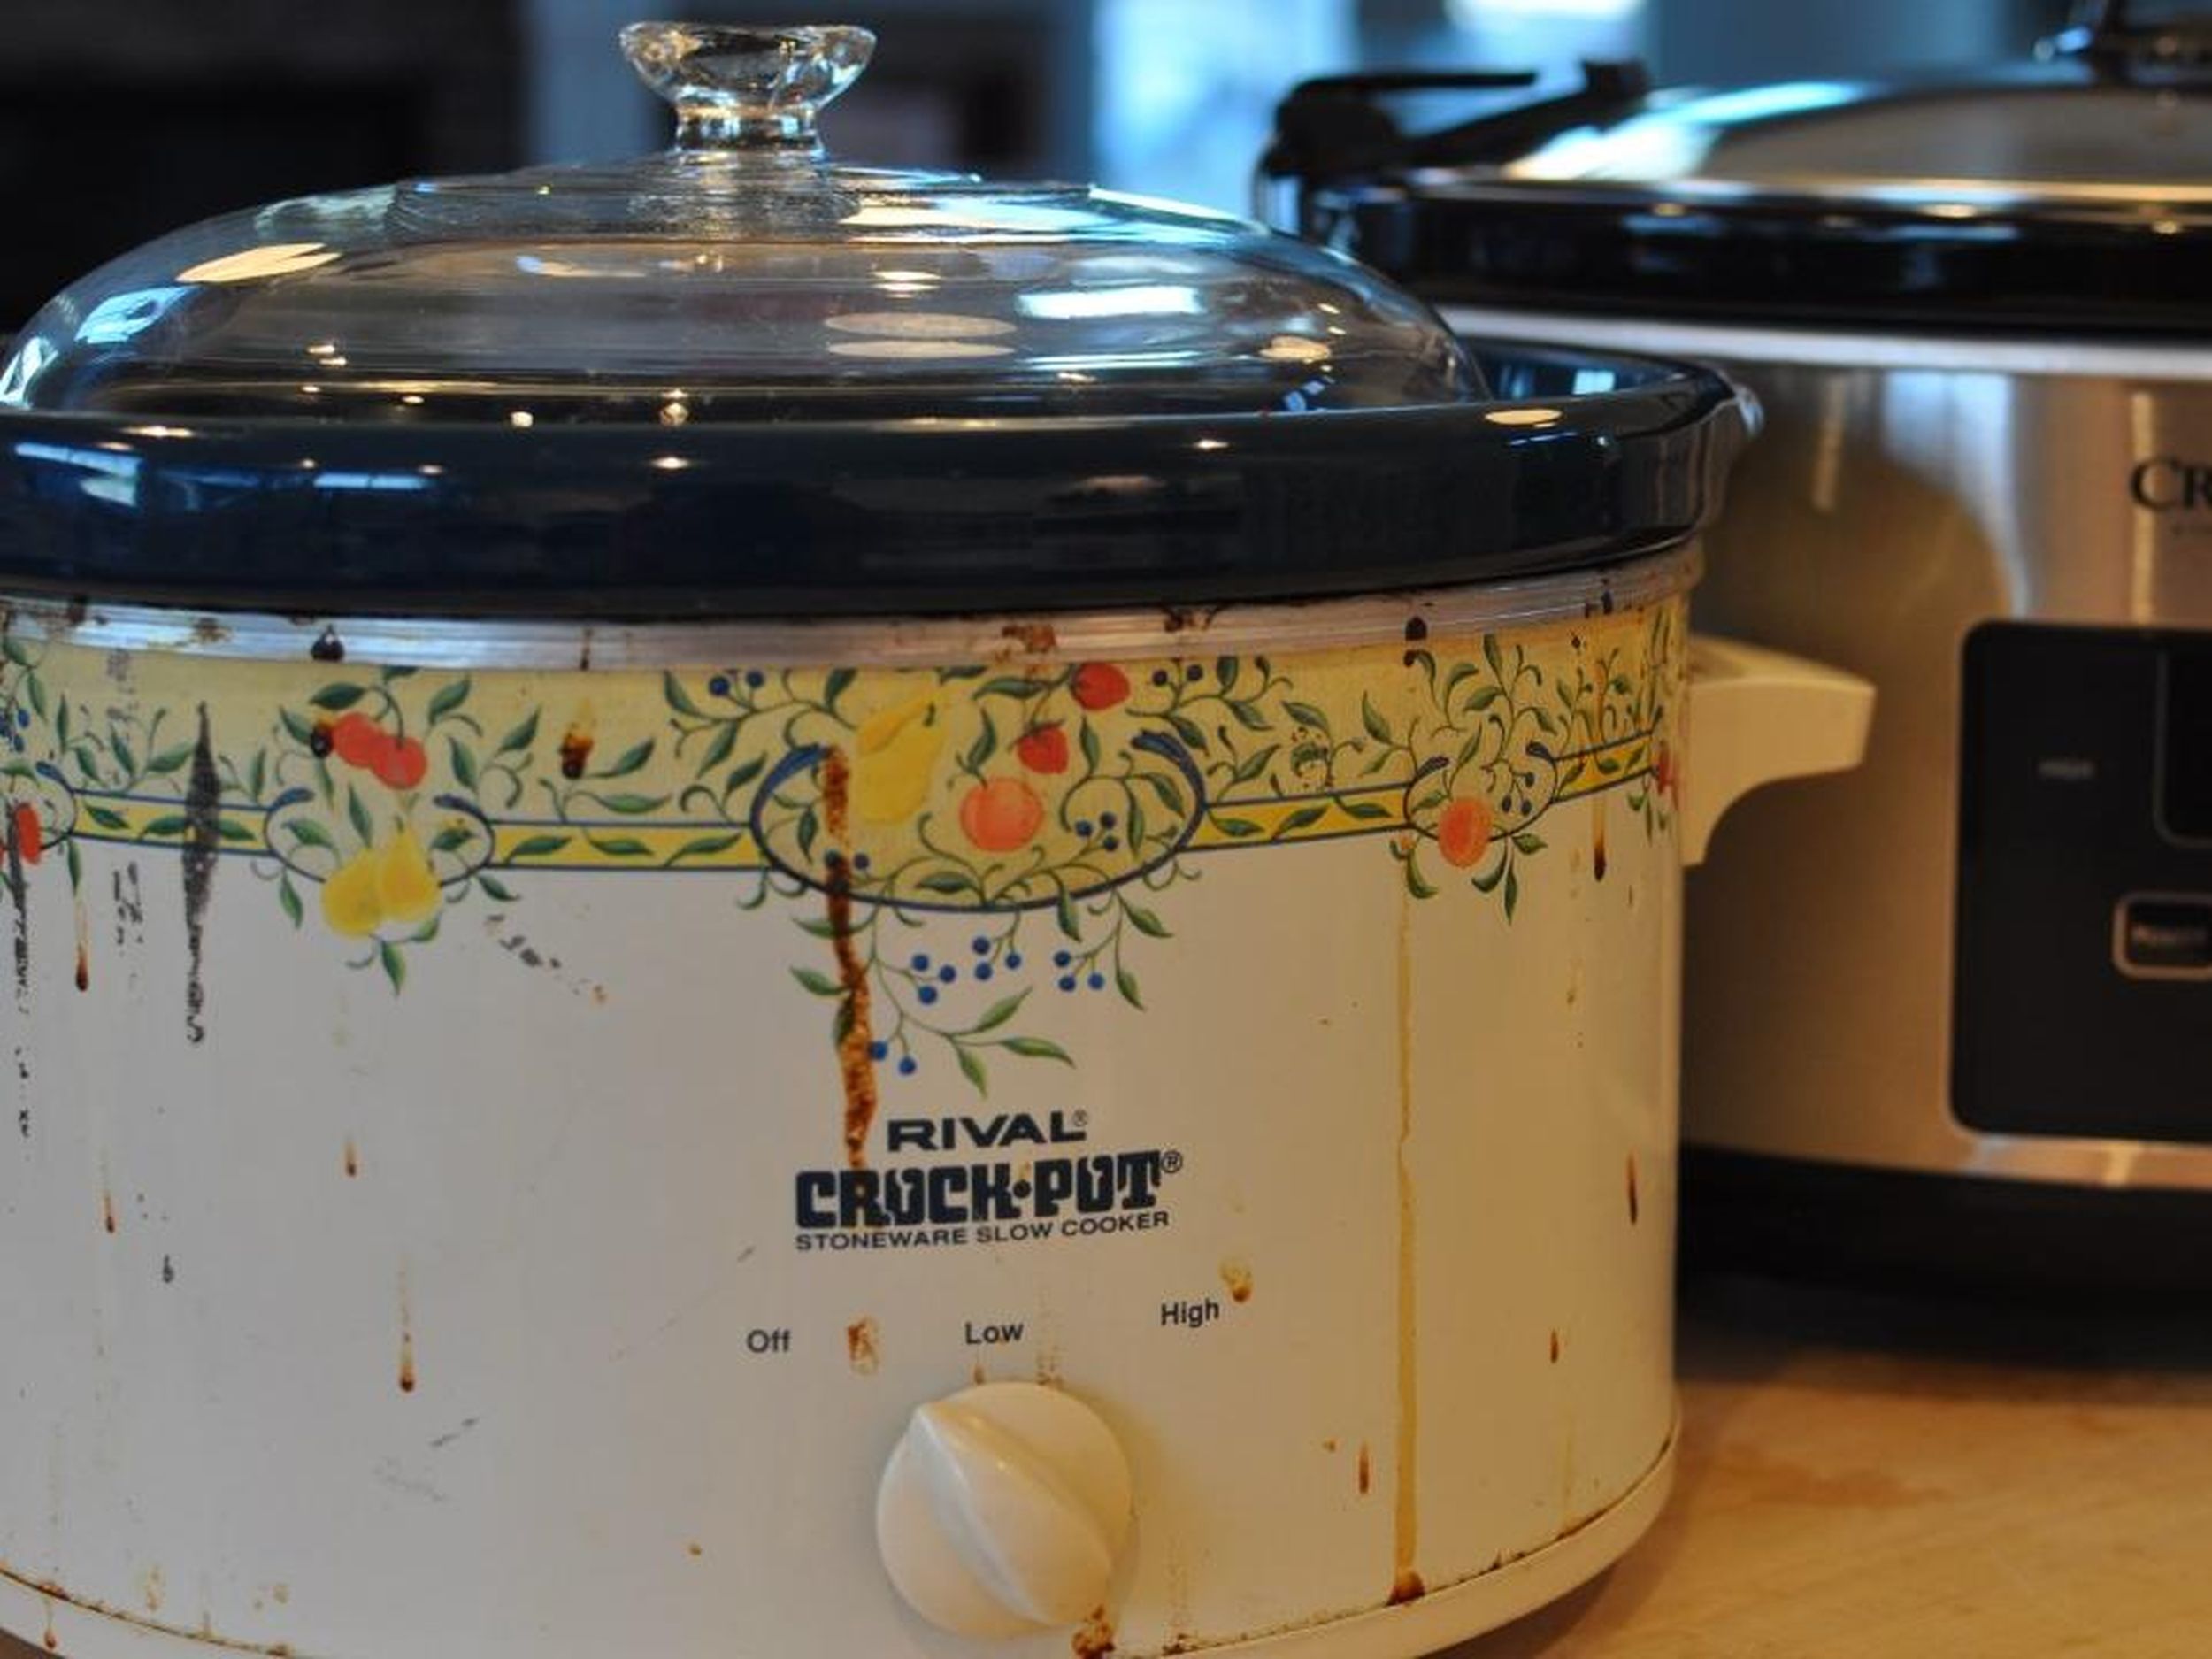 50 years ago, Kansas City introduced the Crock-Pot. These women